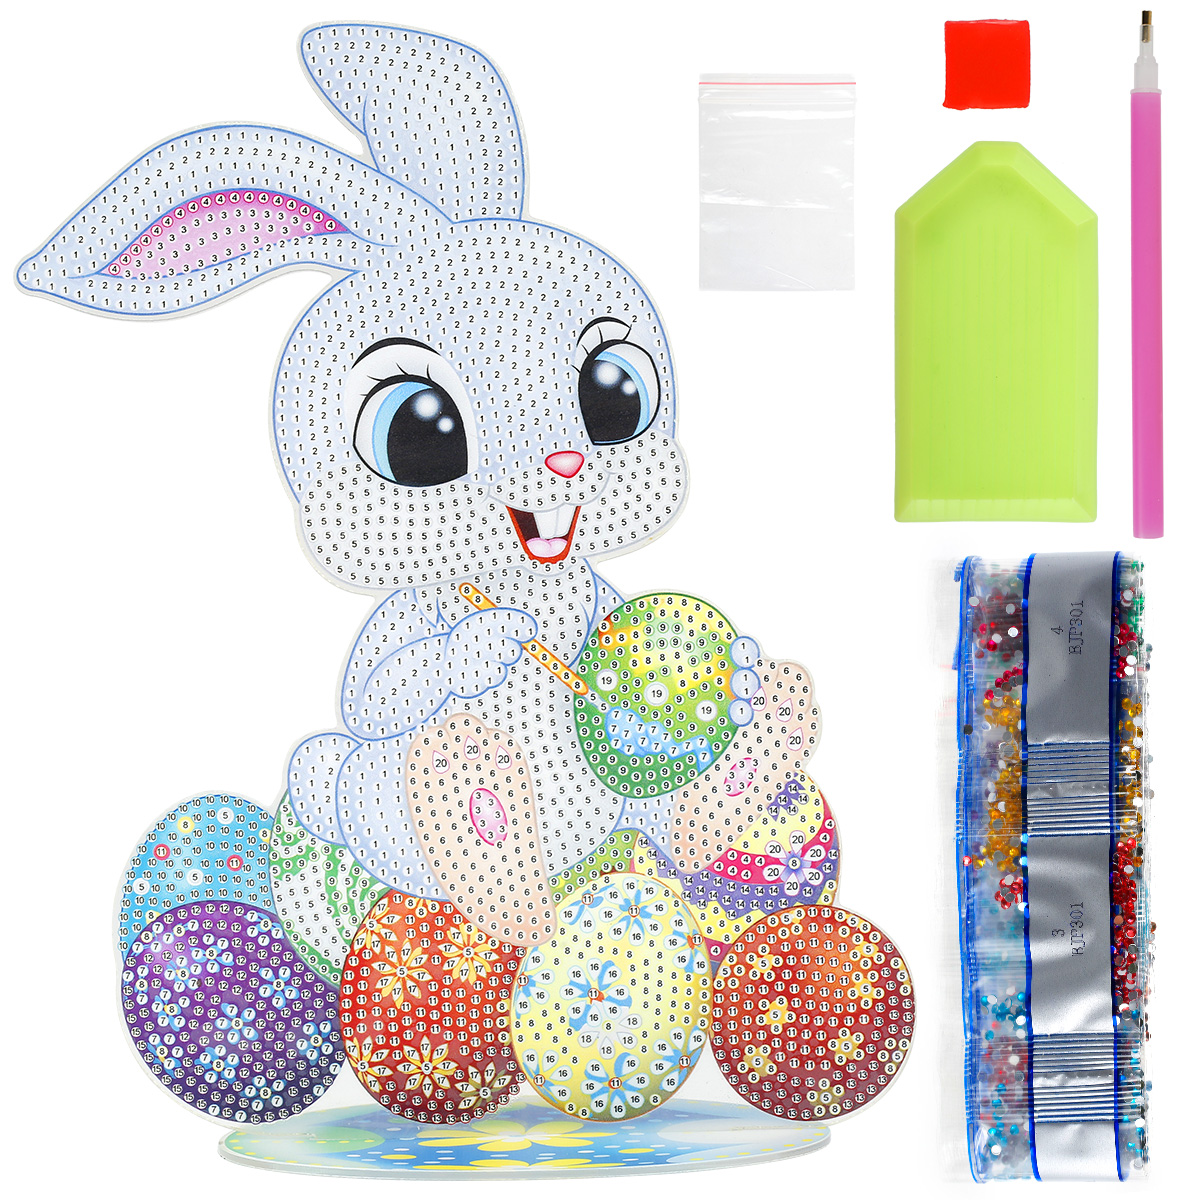 5D Diamond Painting Kits Cute Bunny Resin Diamond Paint Ornament DIY Diamond Art Painting Kits for Adults Easter Art Crafts Desk Decoration for